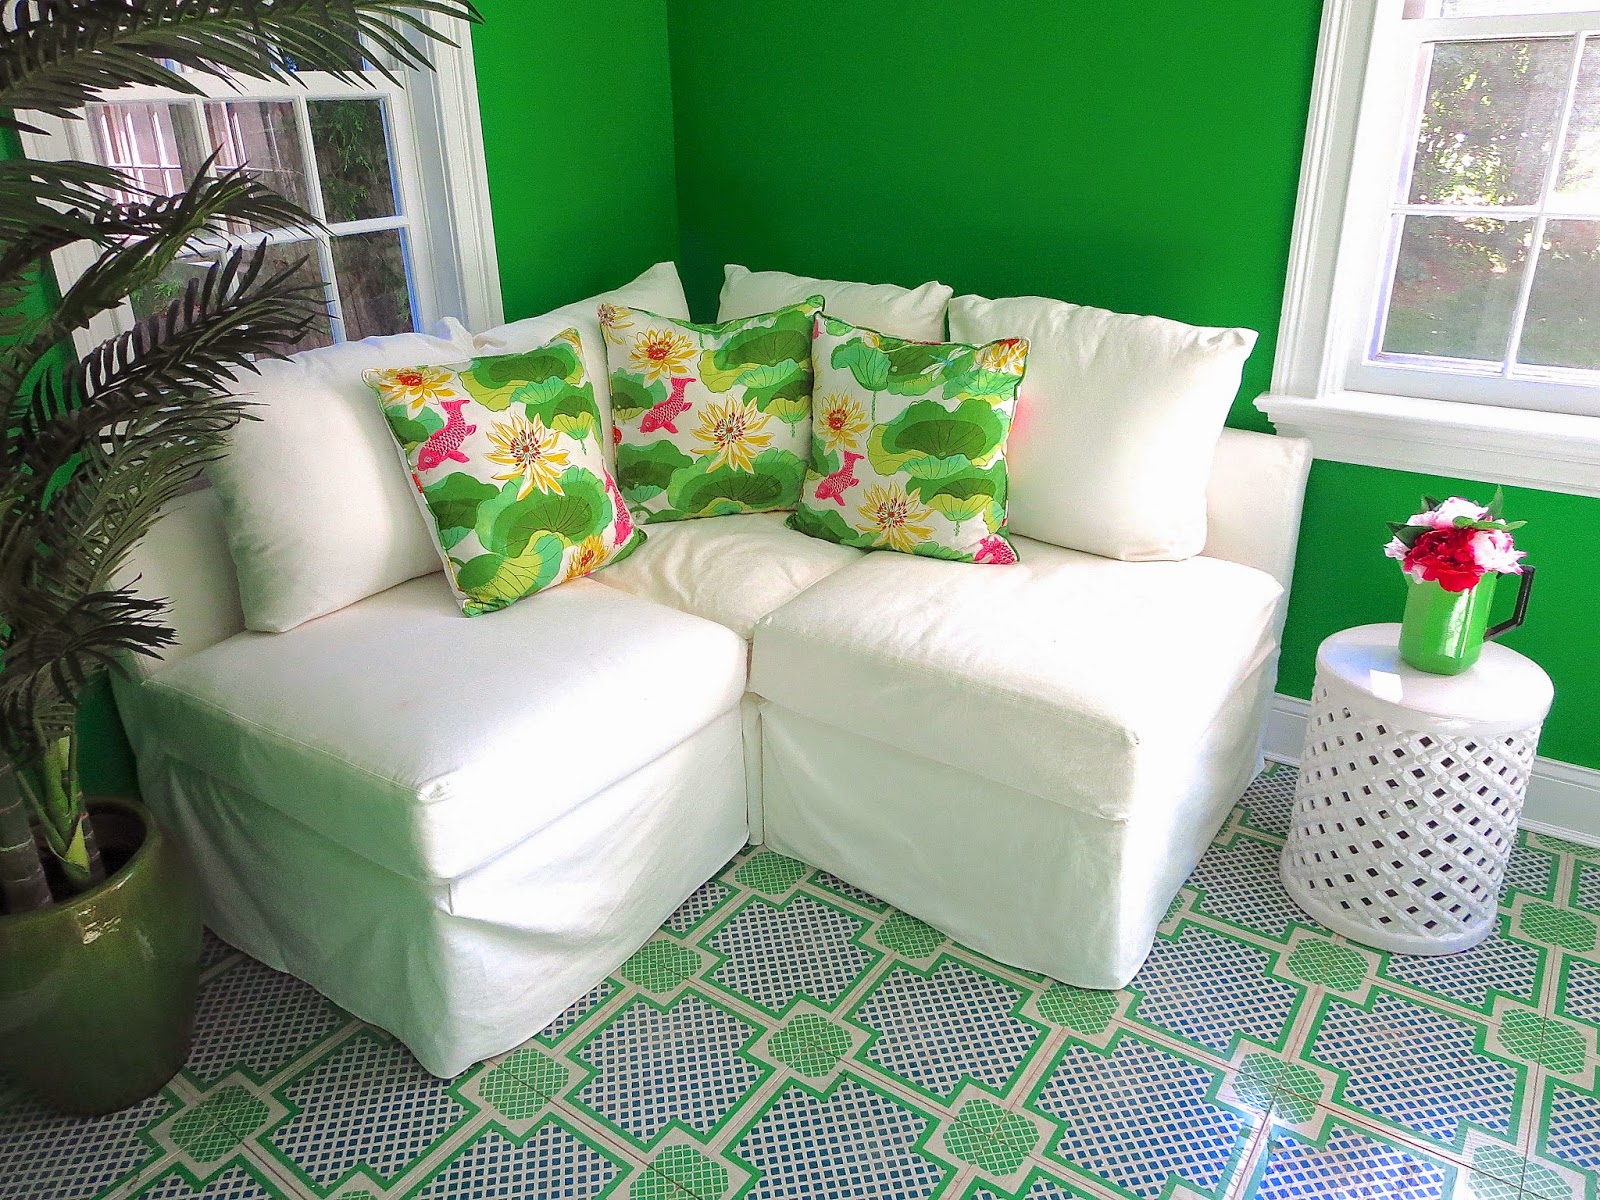 white corner sofa sectional seating painted wood tile floors